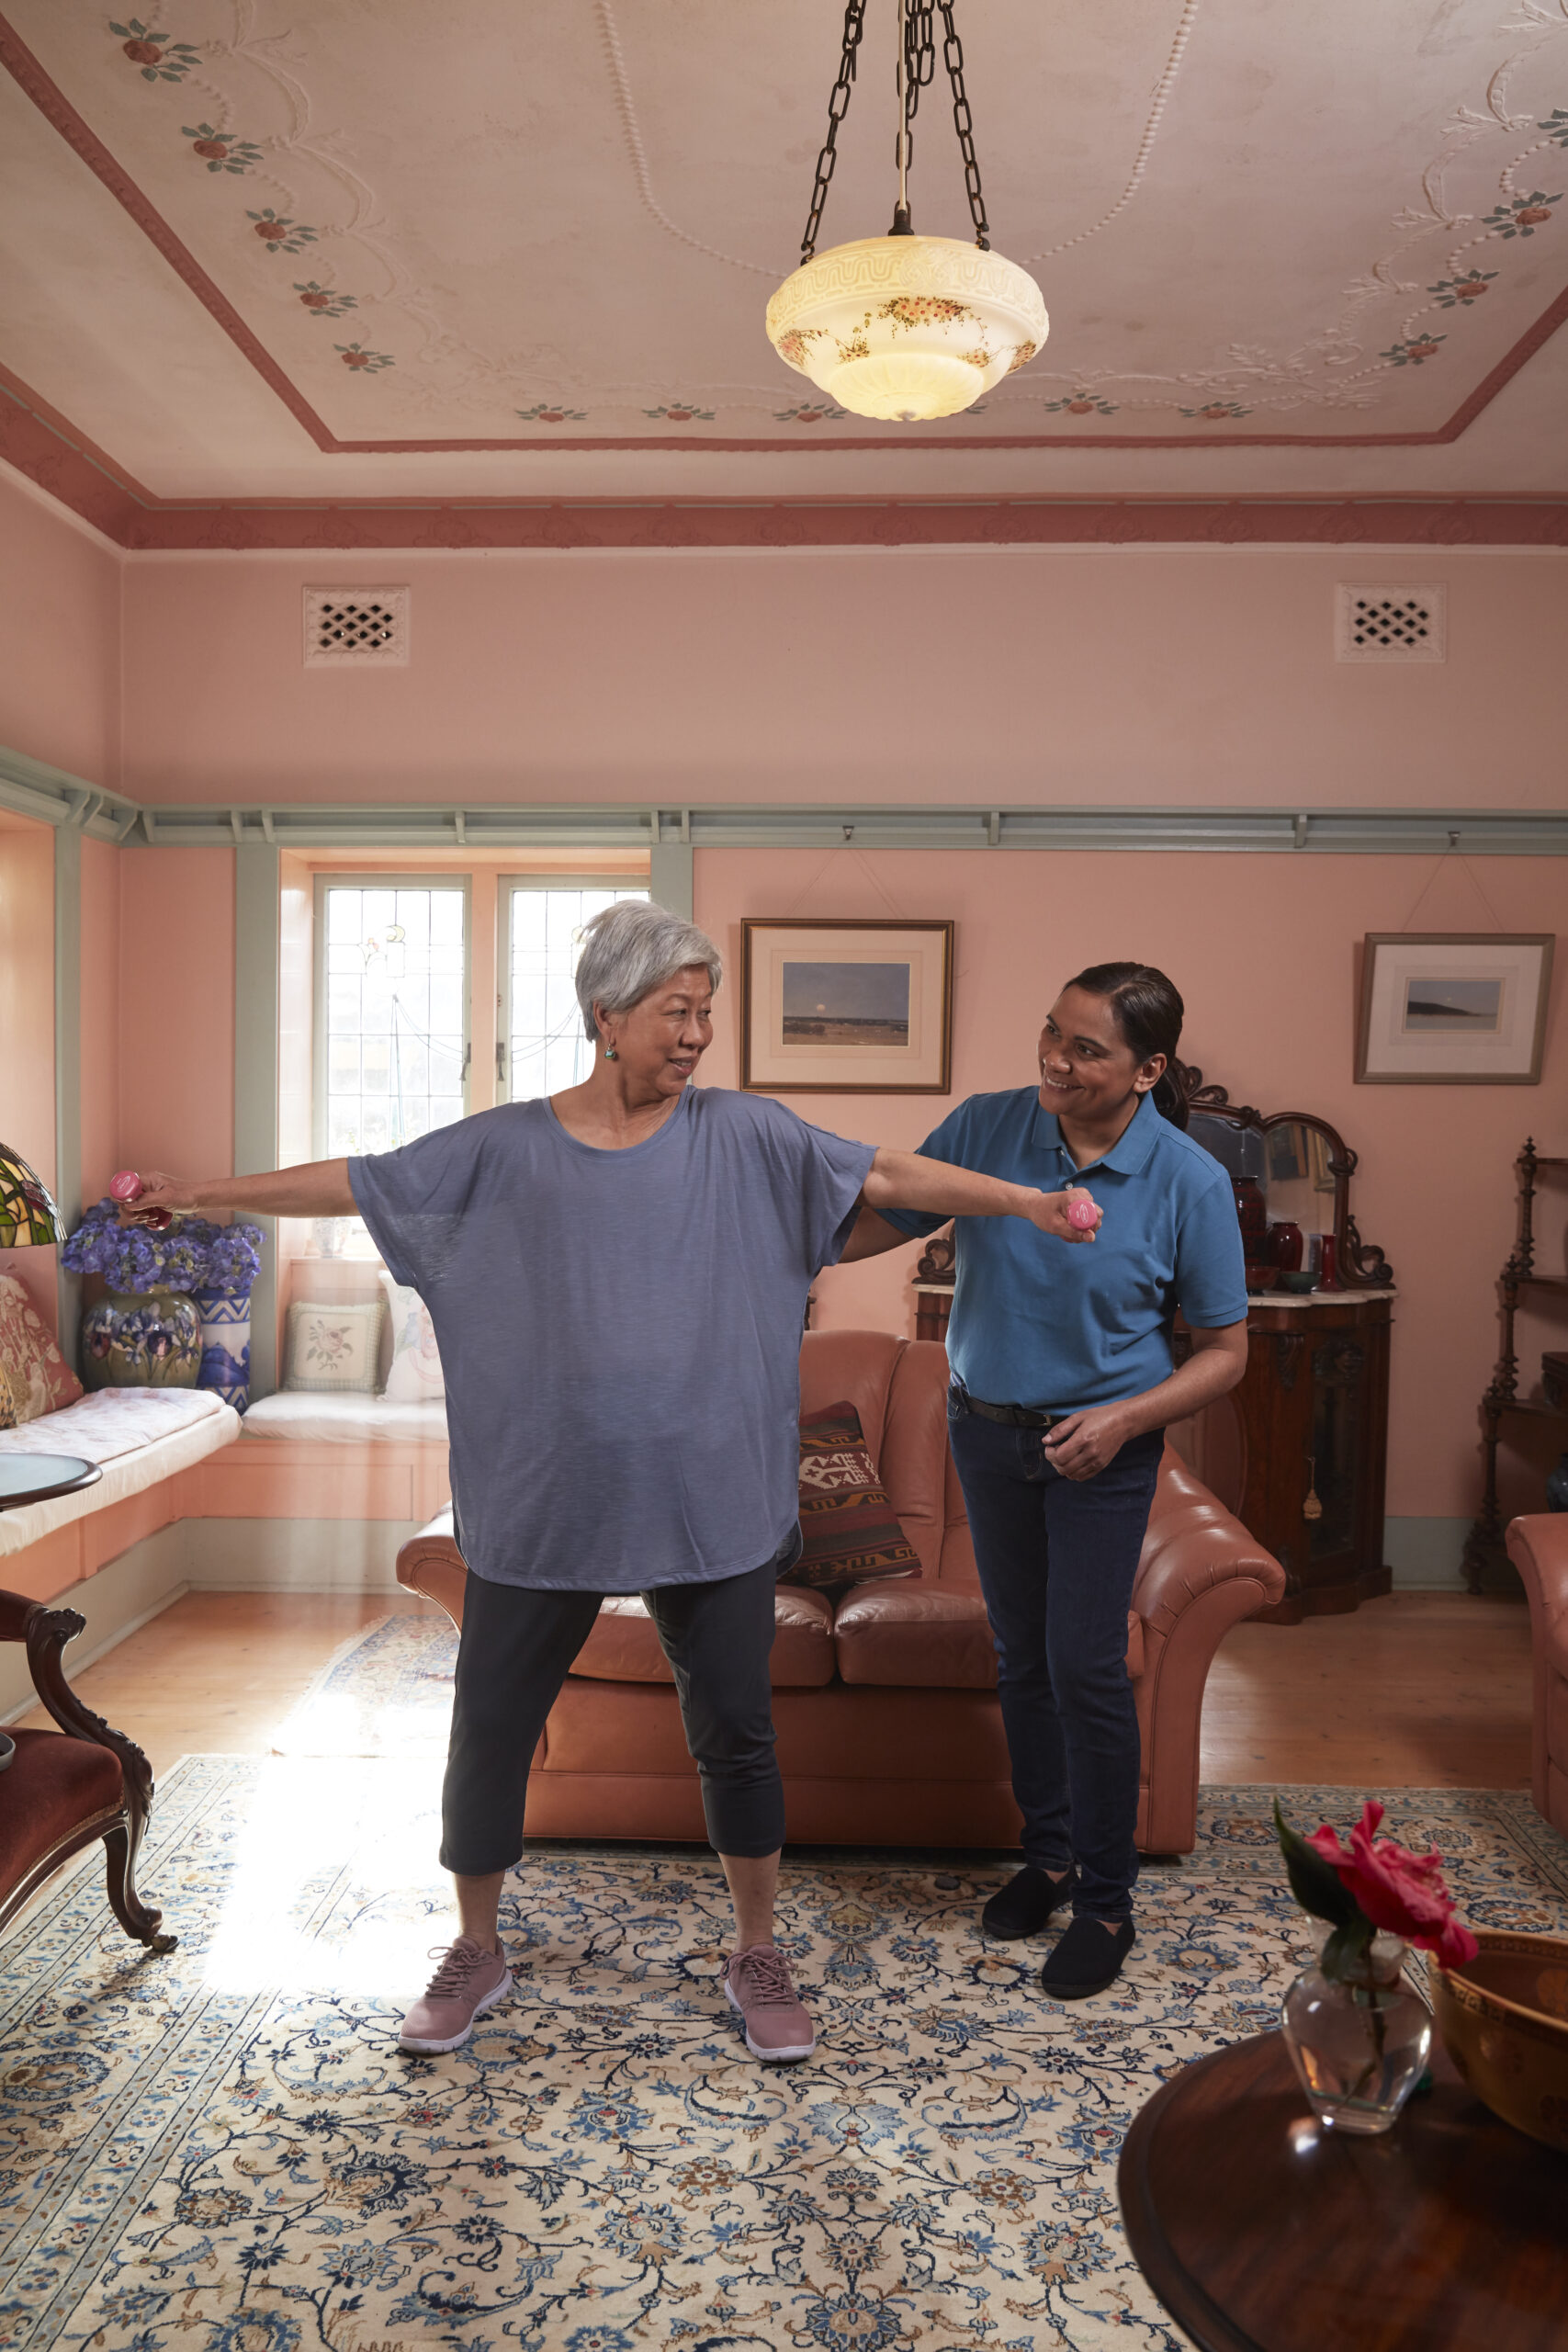 Home care worker helping senior woman exercise